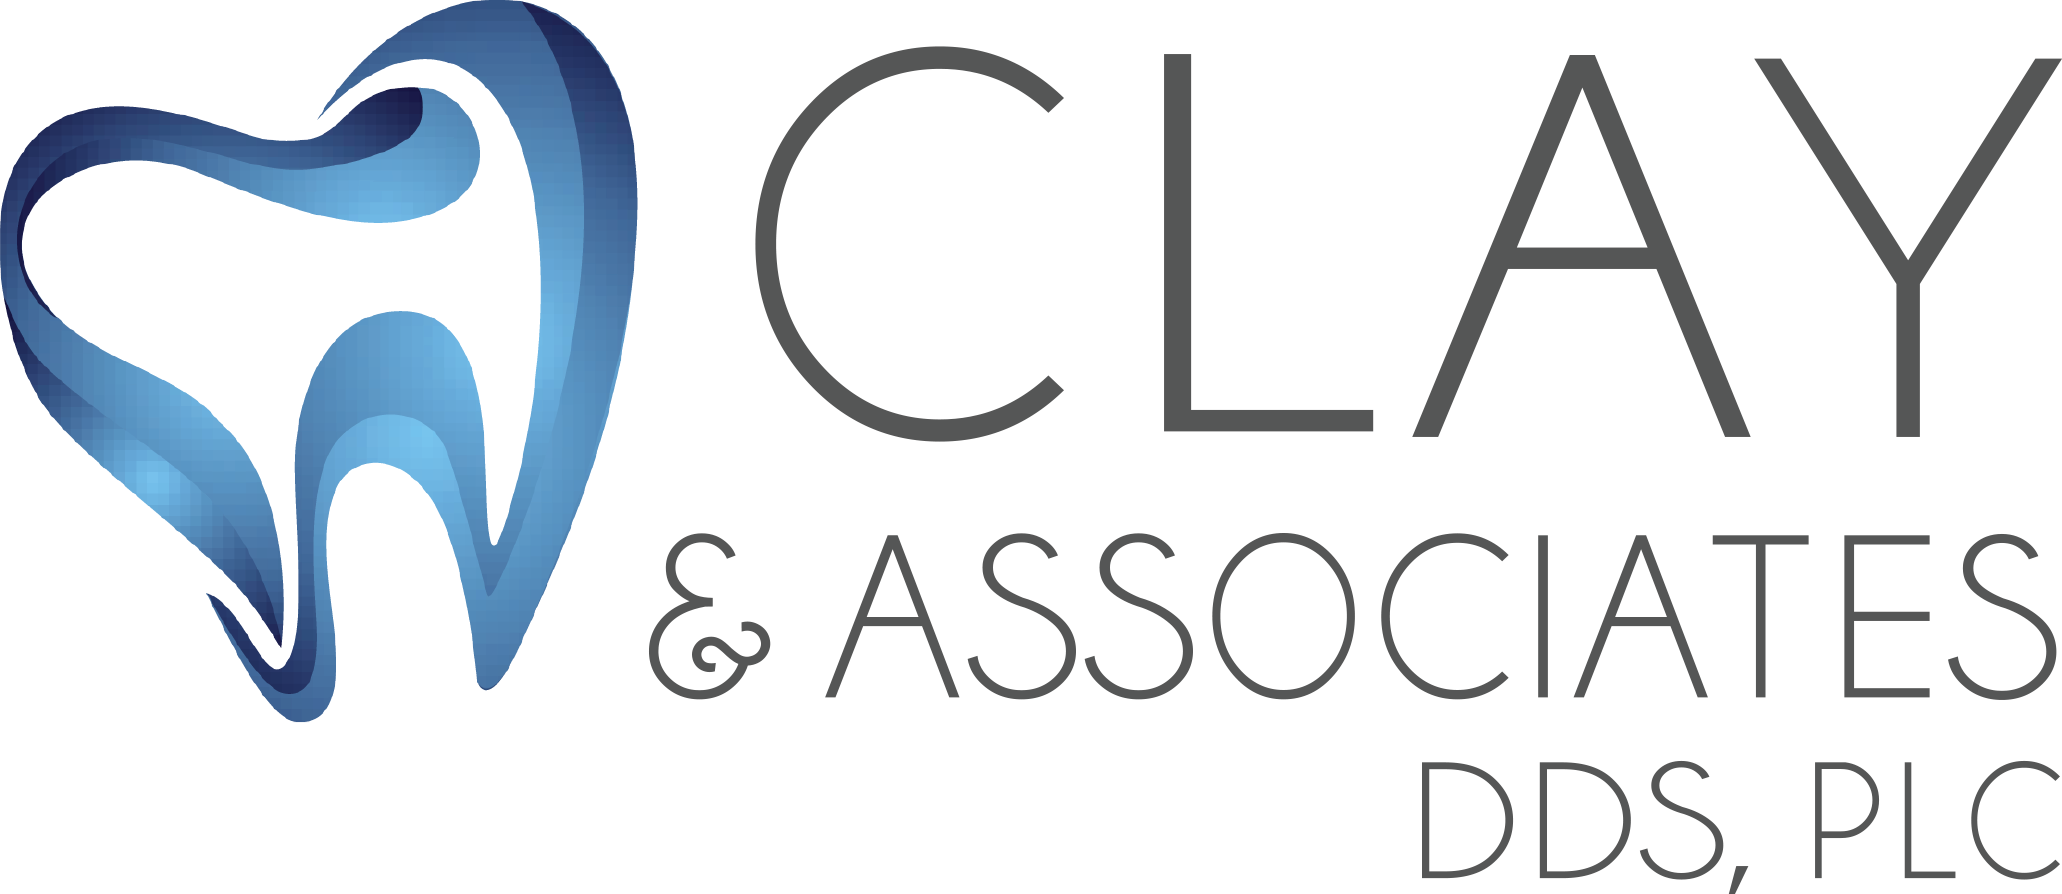 Clay and Associates DDS, PLC